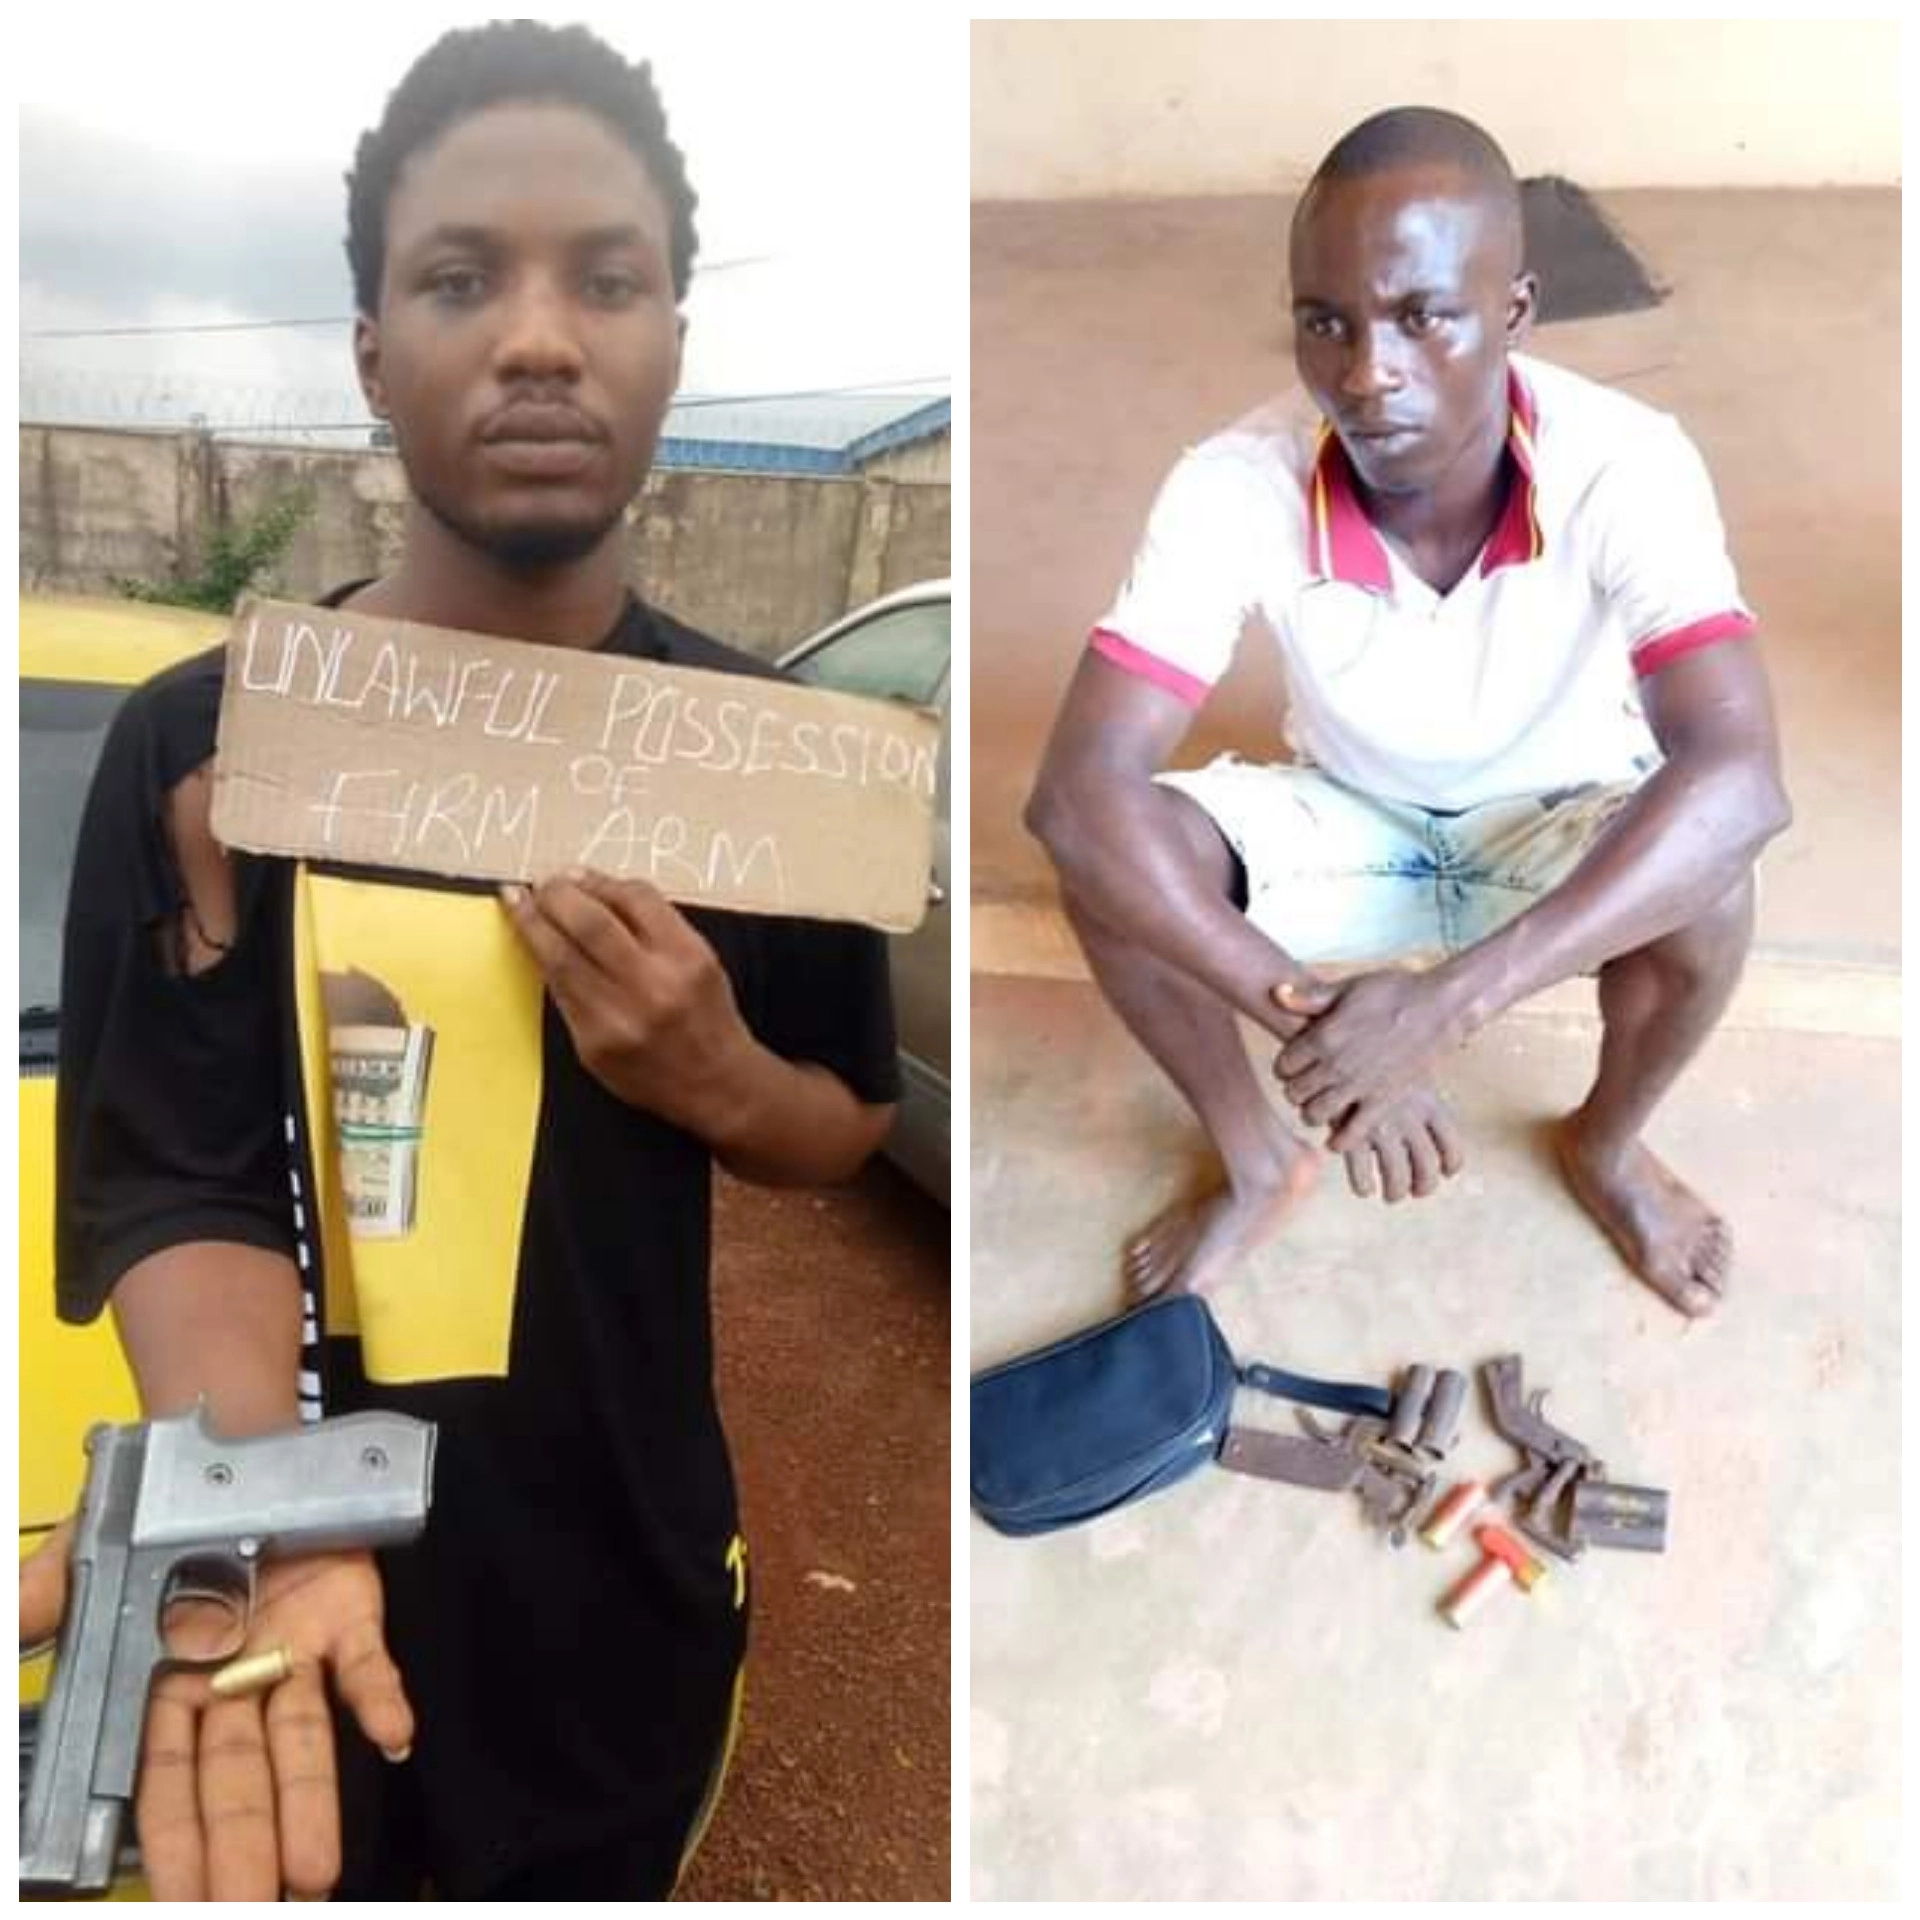 NPF ARREST TWO SUSPECTS FOR ILLEGAL POSSESION OF FIREARMS, NPF ARREST TWO SUSPECTS FOR ILLEGAL POSSESION OF FIREARMS, INFINITY LOADED